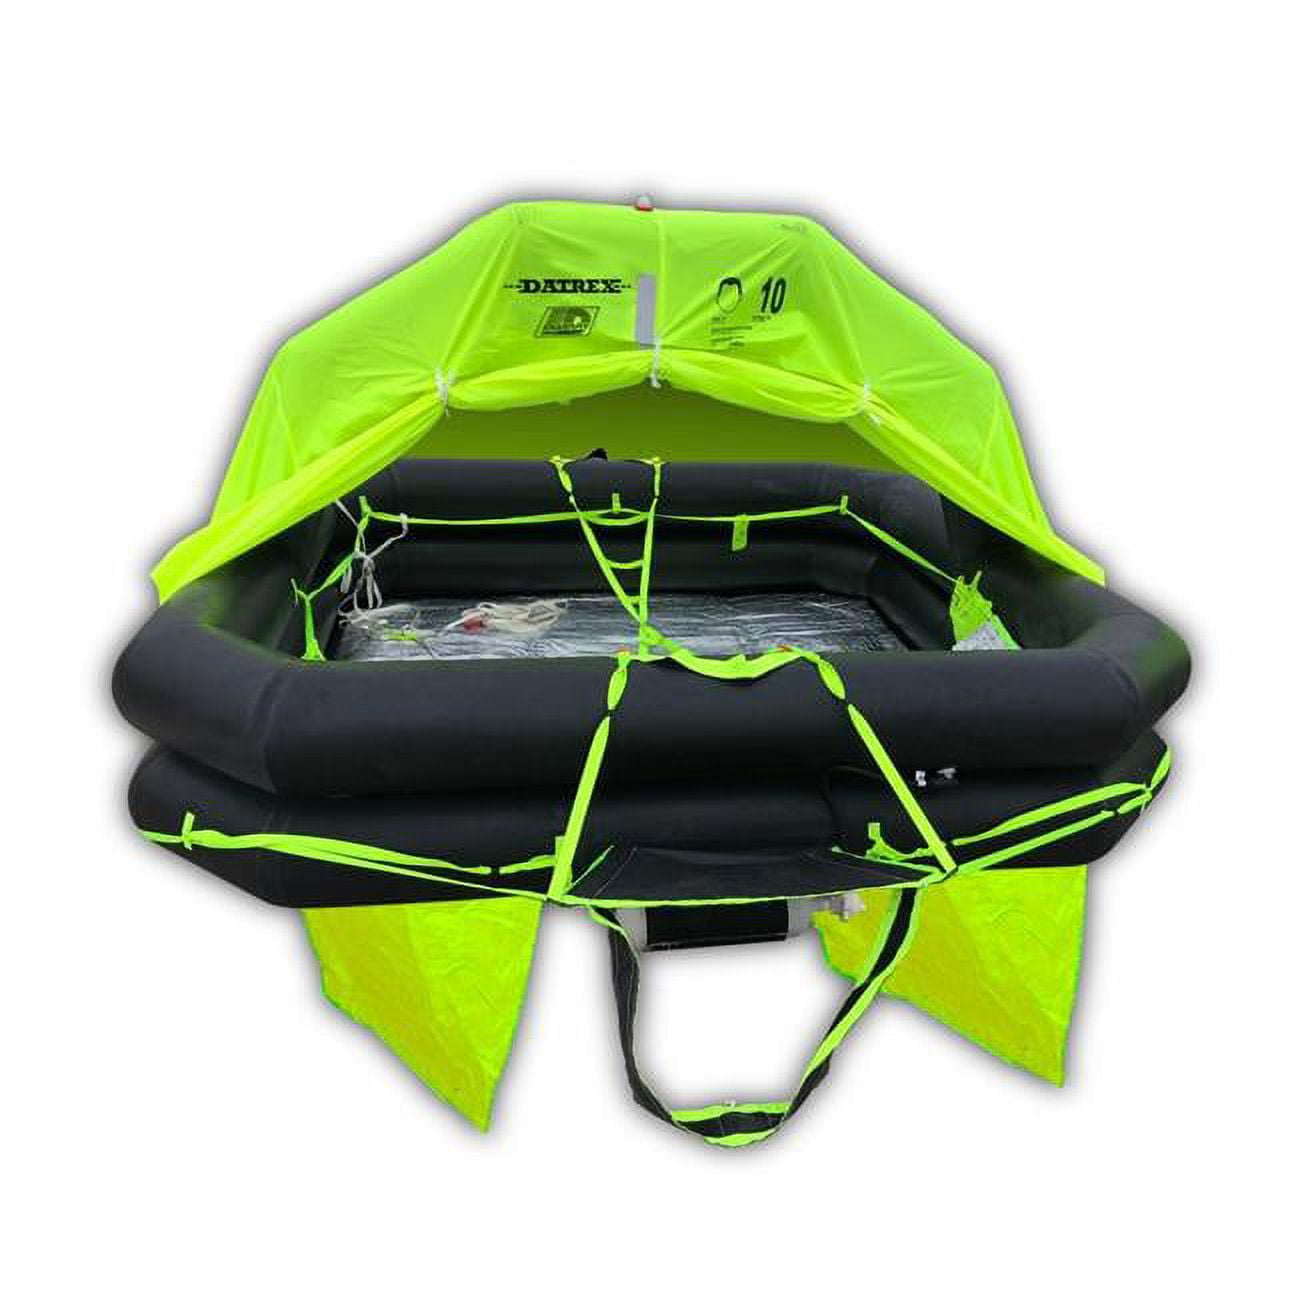 DUY8SVR 8 Person Liberty Recreational Offshore Raft with Liferaft in Valise -  Datrex